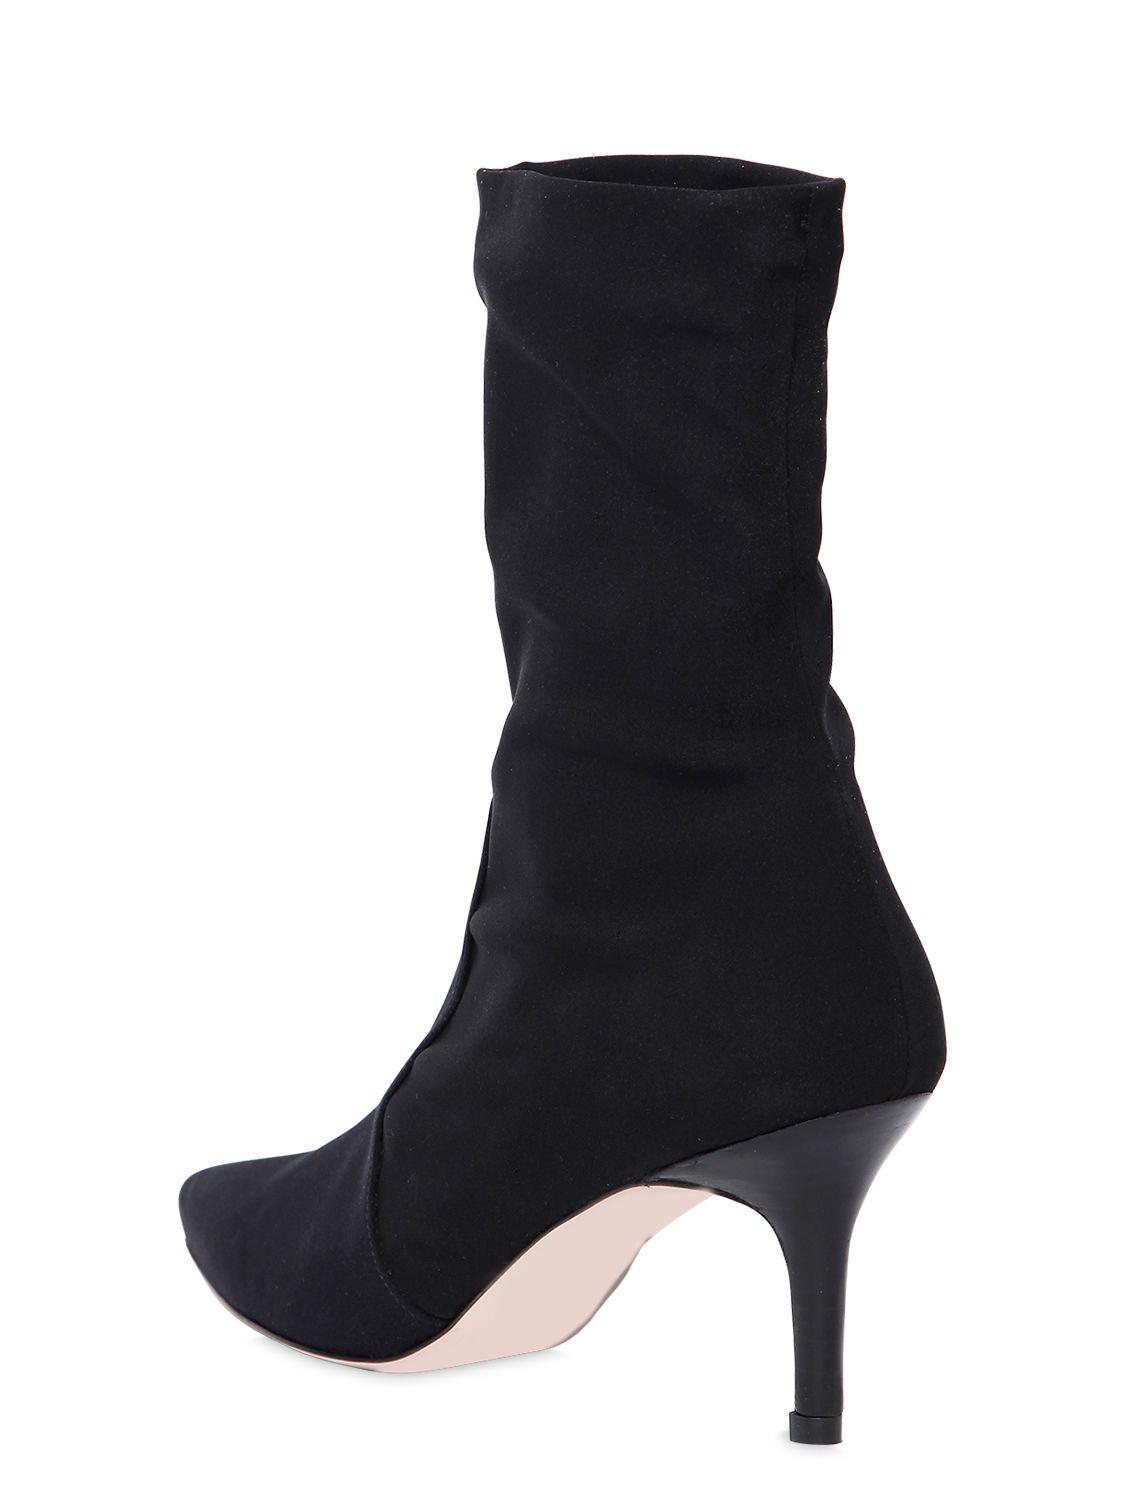 Stuart Weitzman Leather 80mm Axiom Stretch Sock Ankle Boots in Black - Lyst